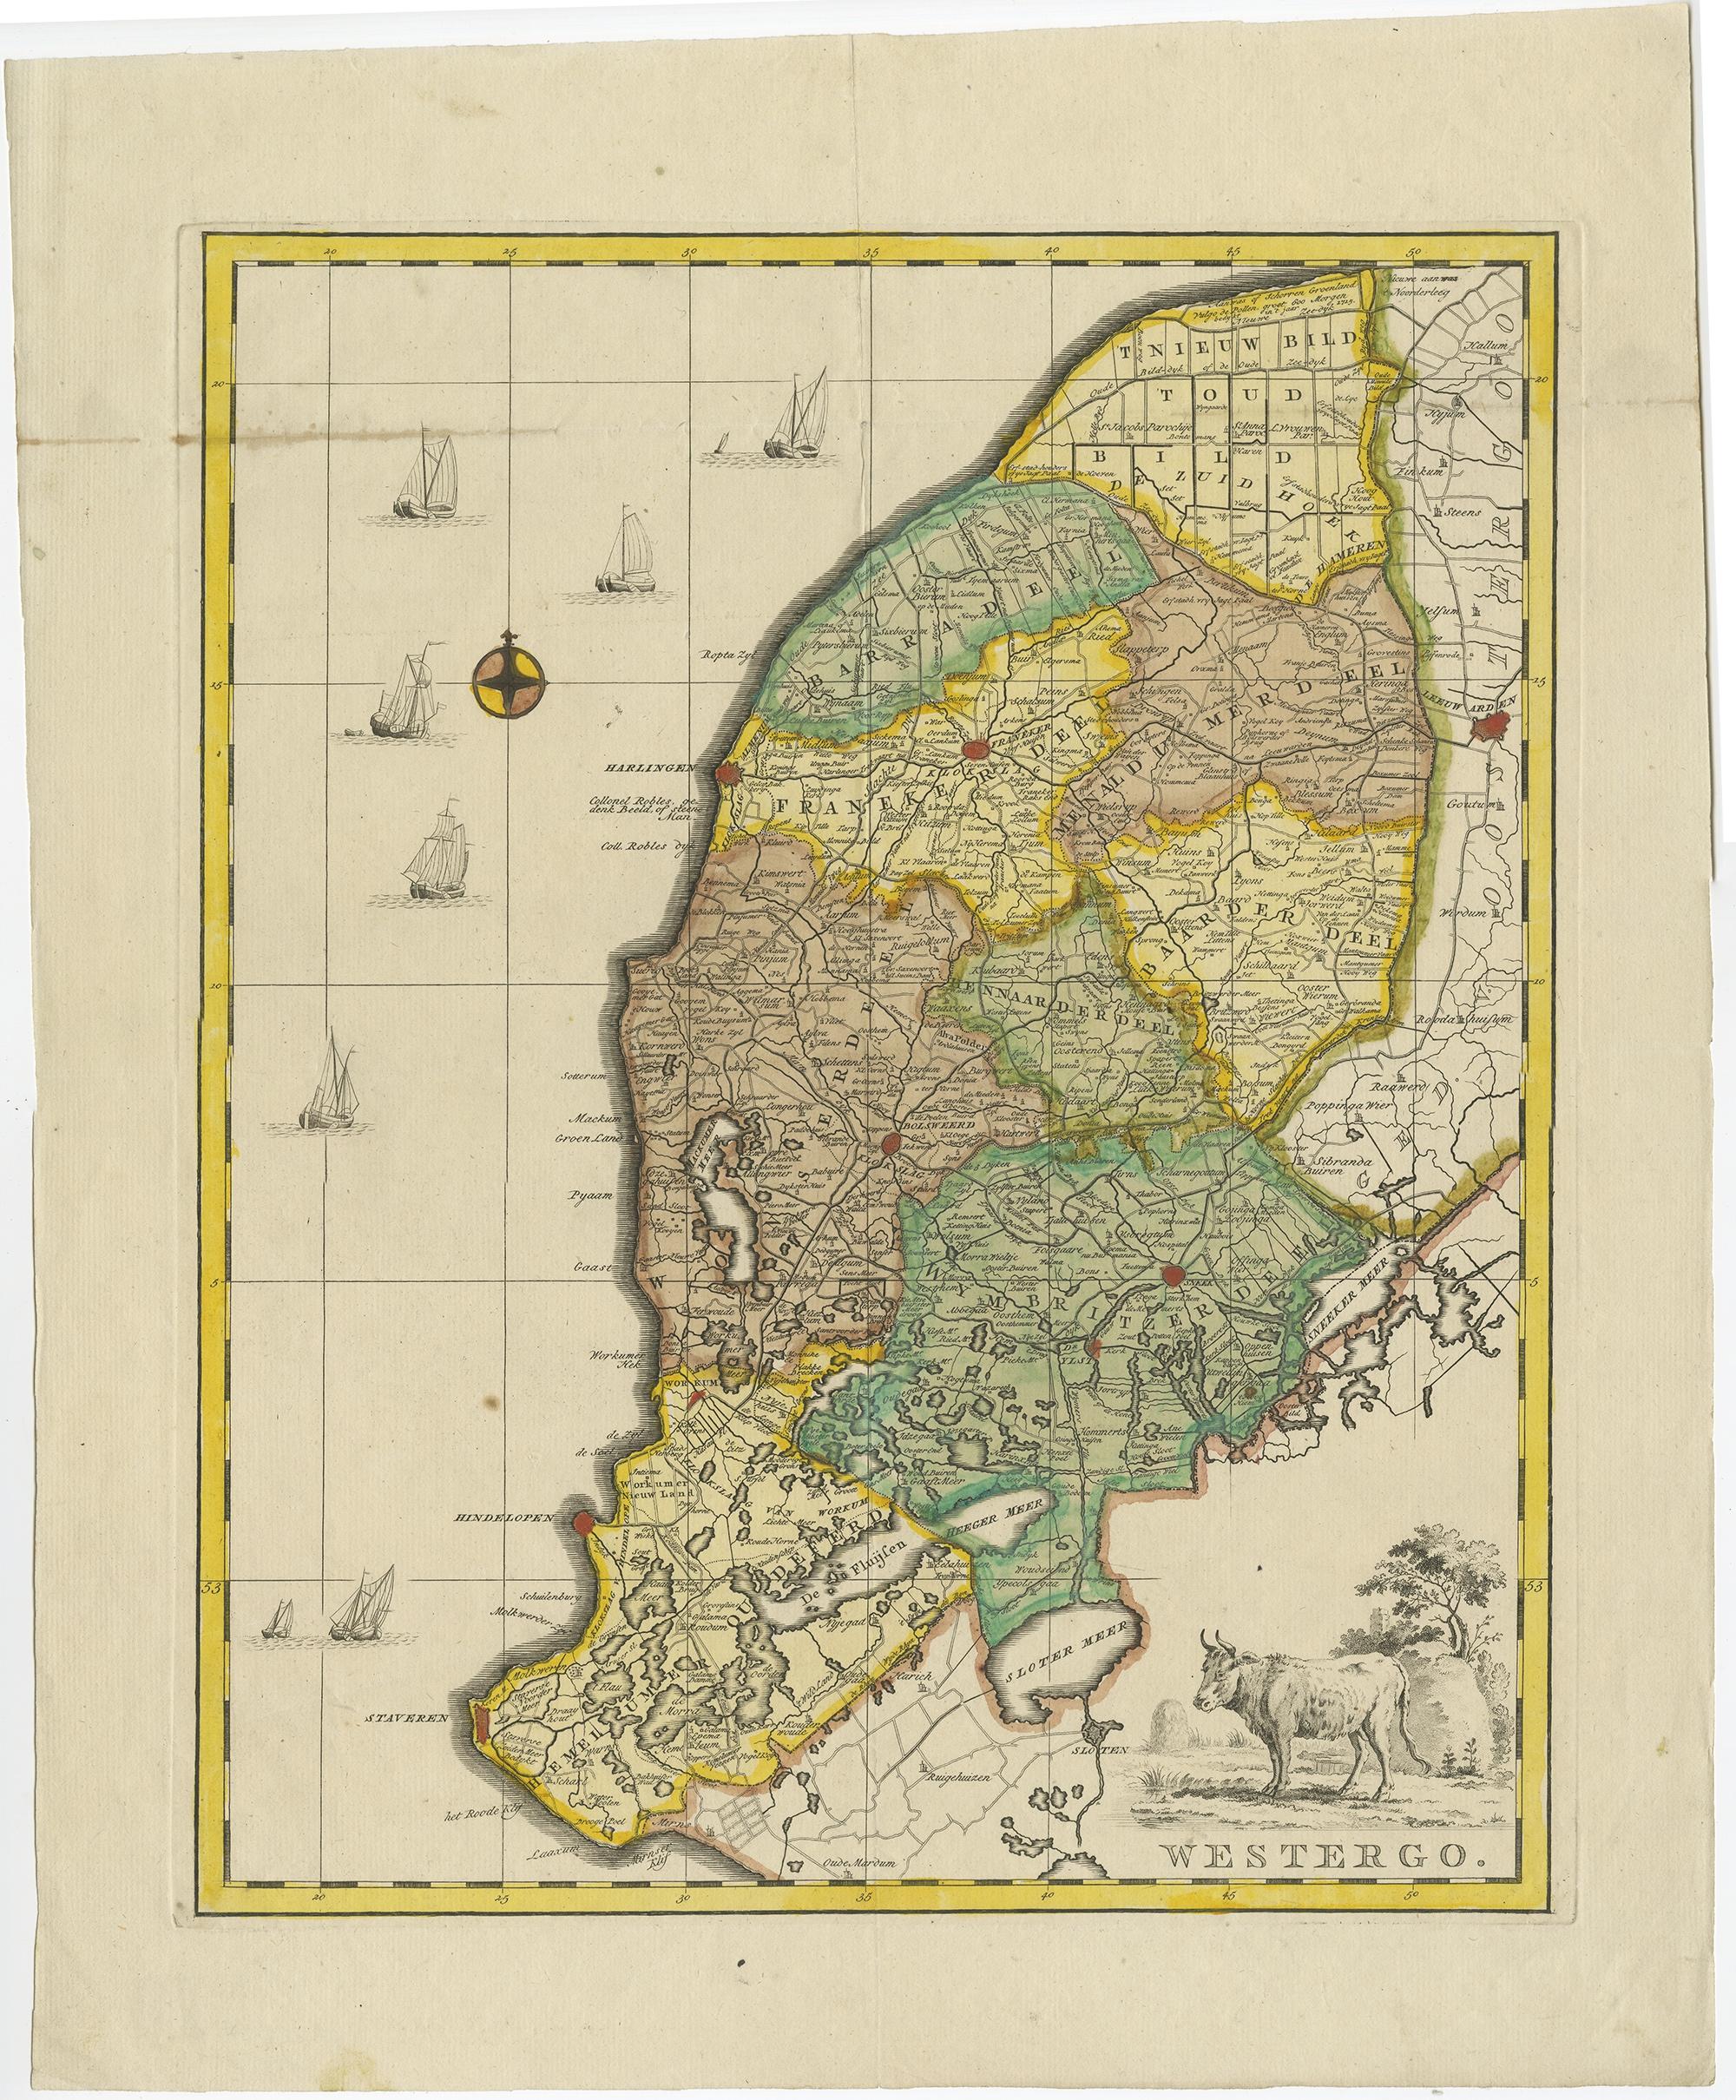 Antique map titled 'Westergo'. 

Original antique map of Westergo, part of the province of Friesland, the Netherlands. Published 1744.

Artists and engravers: Isaak Tirion (1705 in Utrecht – 1765 in Amsterdam) was an 18th-century publisher from